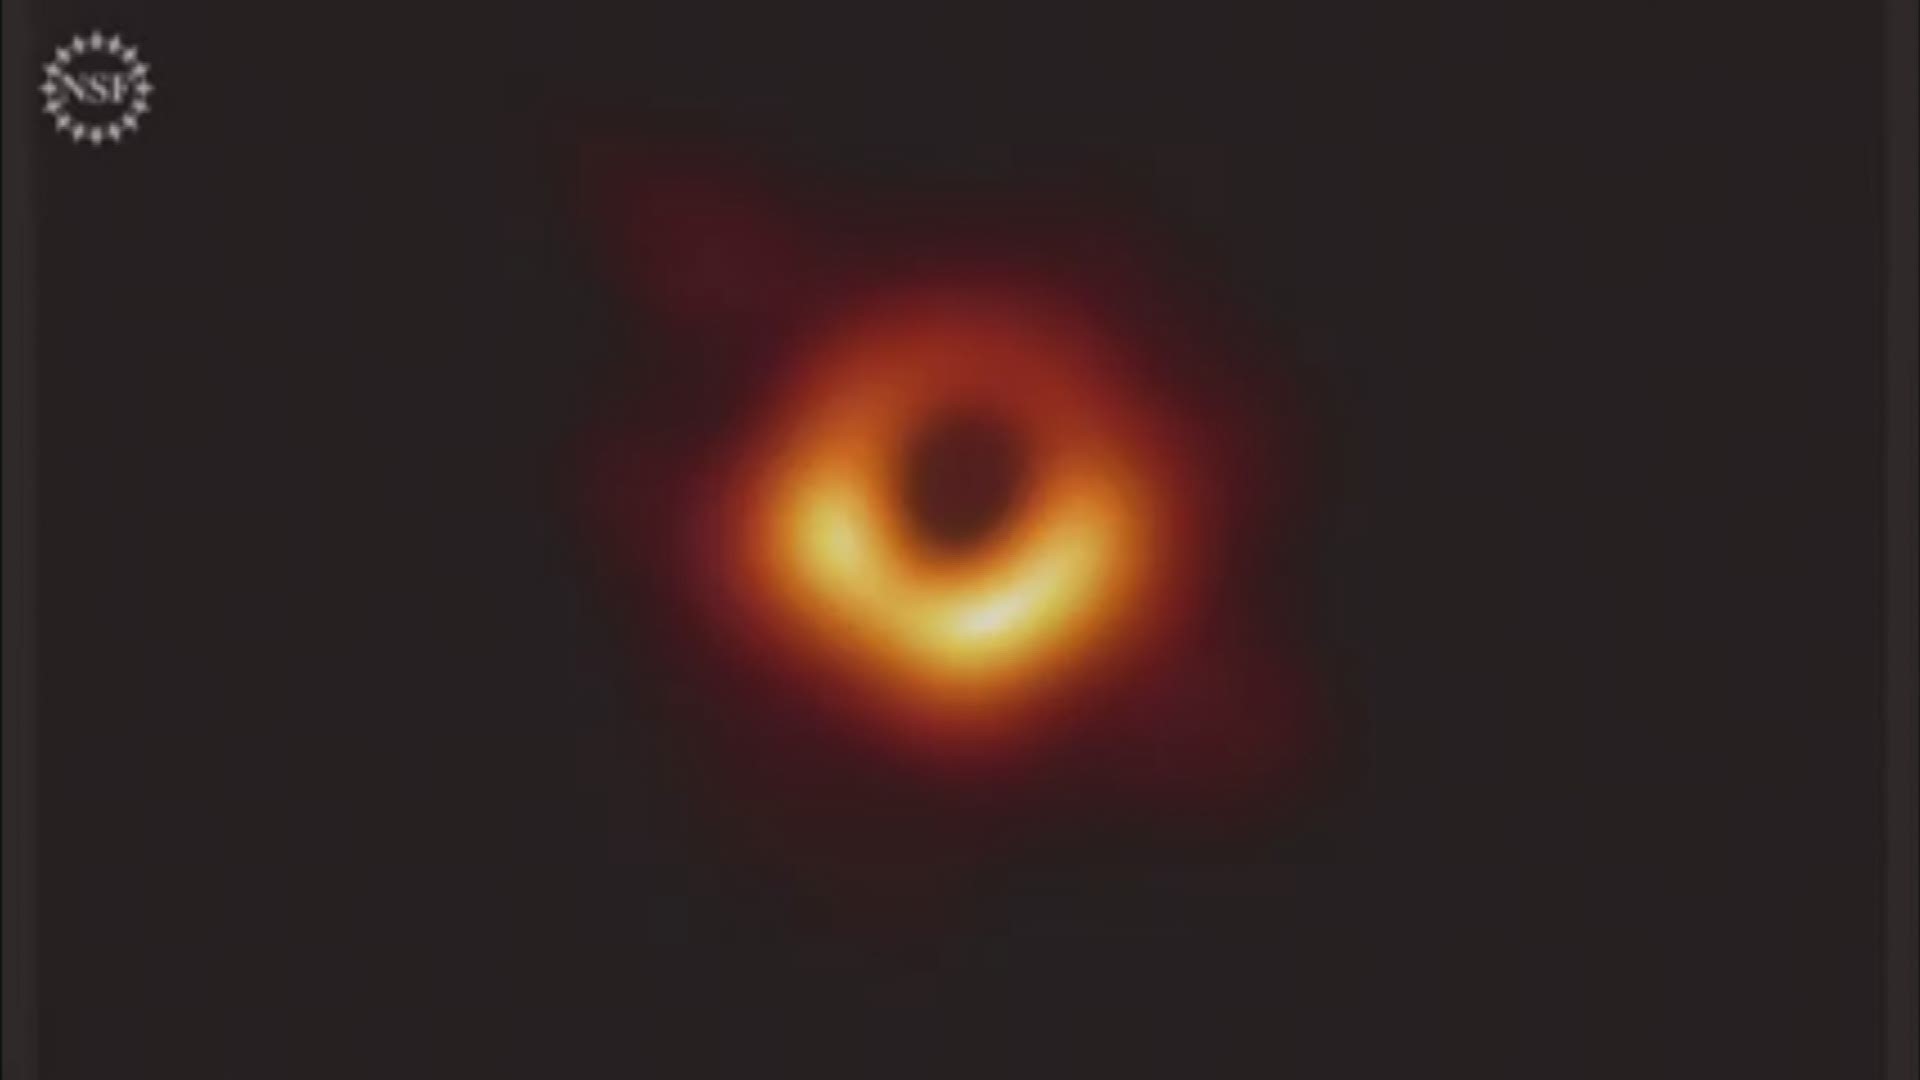 At a press conference on Wednesday, the National Space Foundation unveiled the first photograph of a black hole